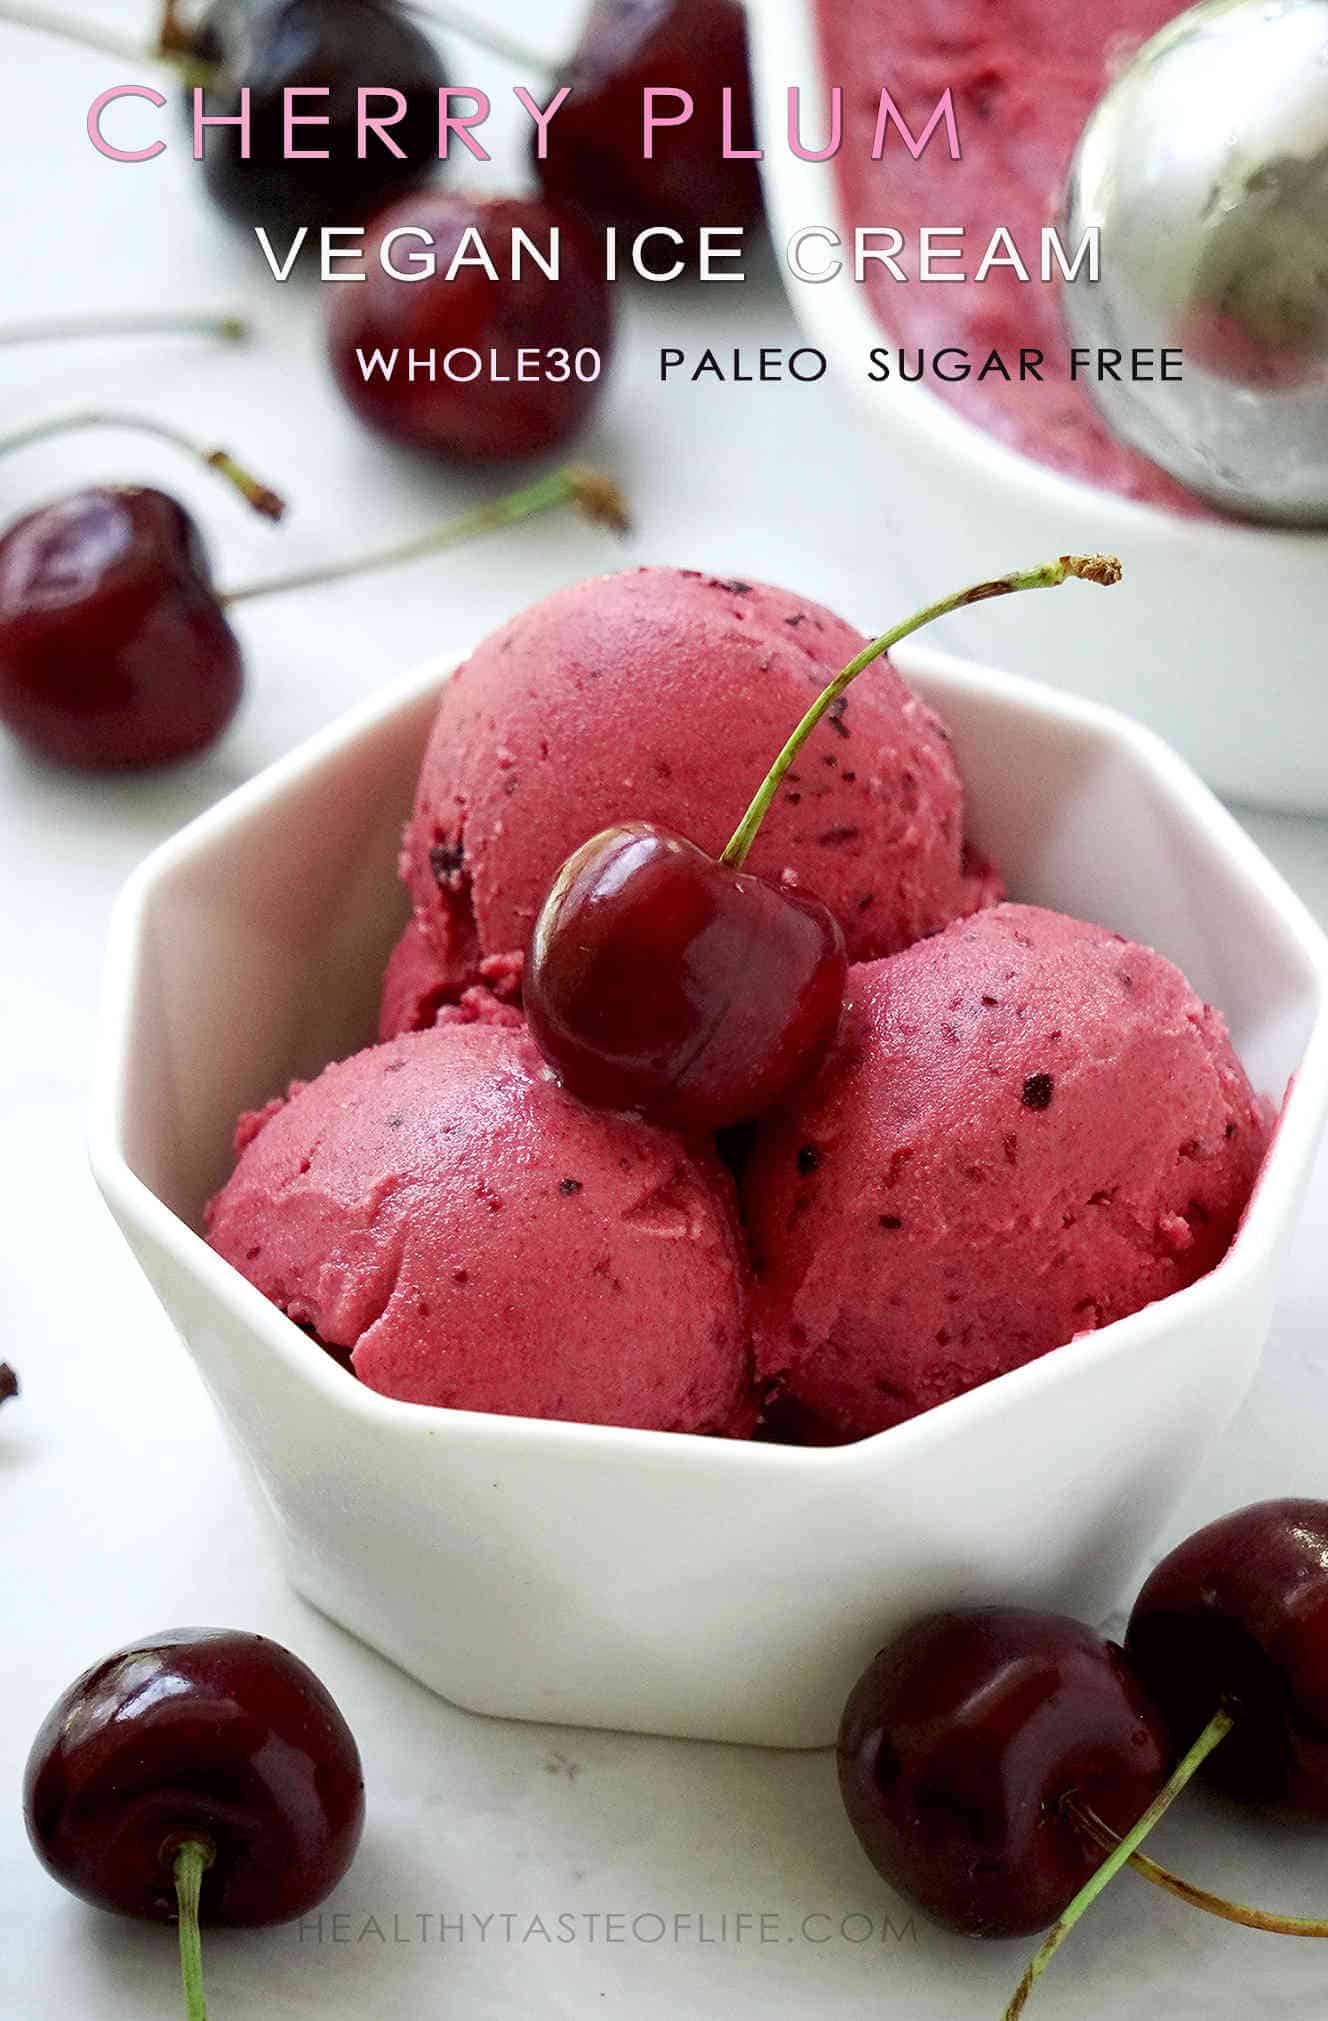 Healthy Dairy Free Cherry Plum Ice Cream Recipe - Whole 30, Paleo, Vegan, Sugar Free, Gluten Free, Clean Eating No Dairy Summer Dessert made of fresh cherries combined with black plums - a delicious sweet and tart dairy free ice cream.